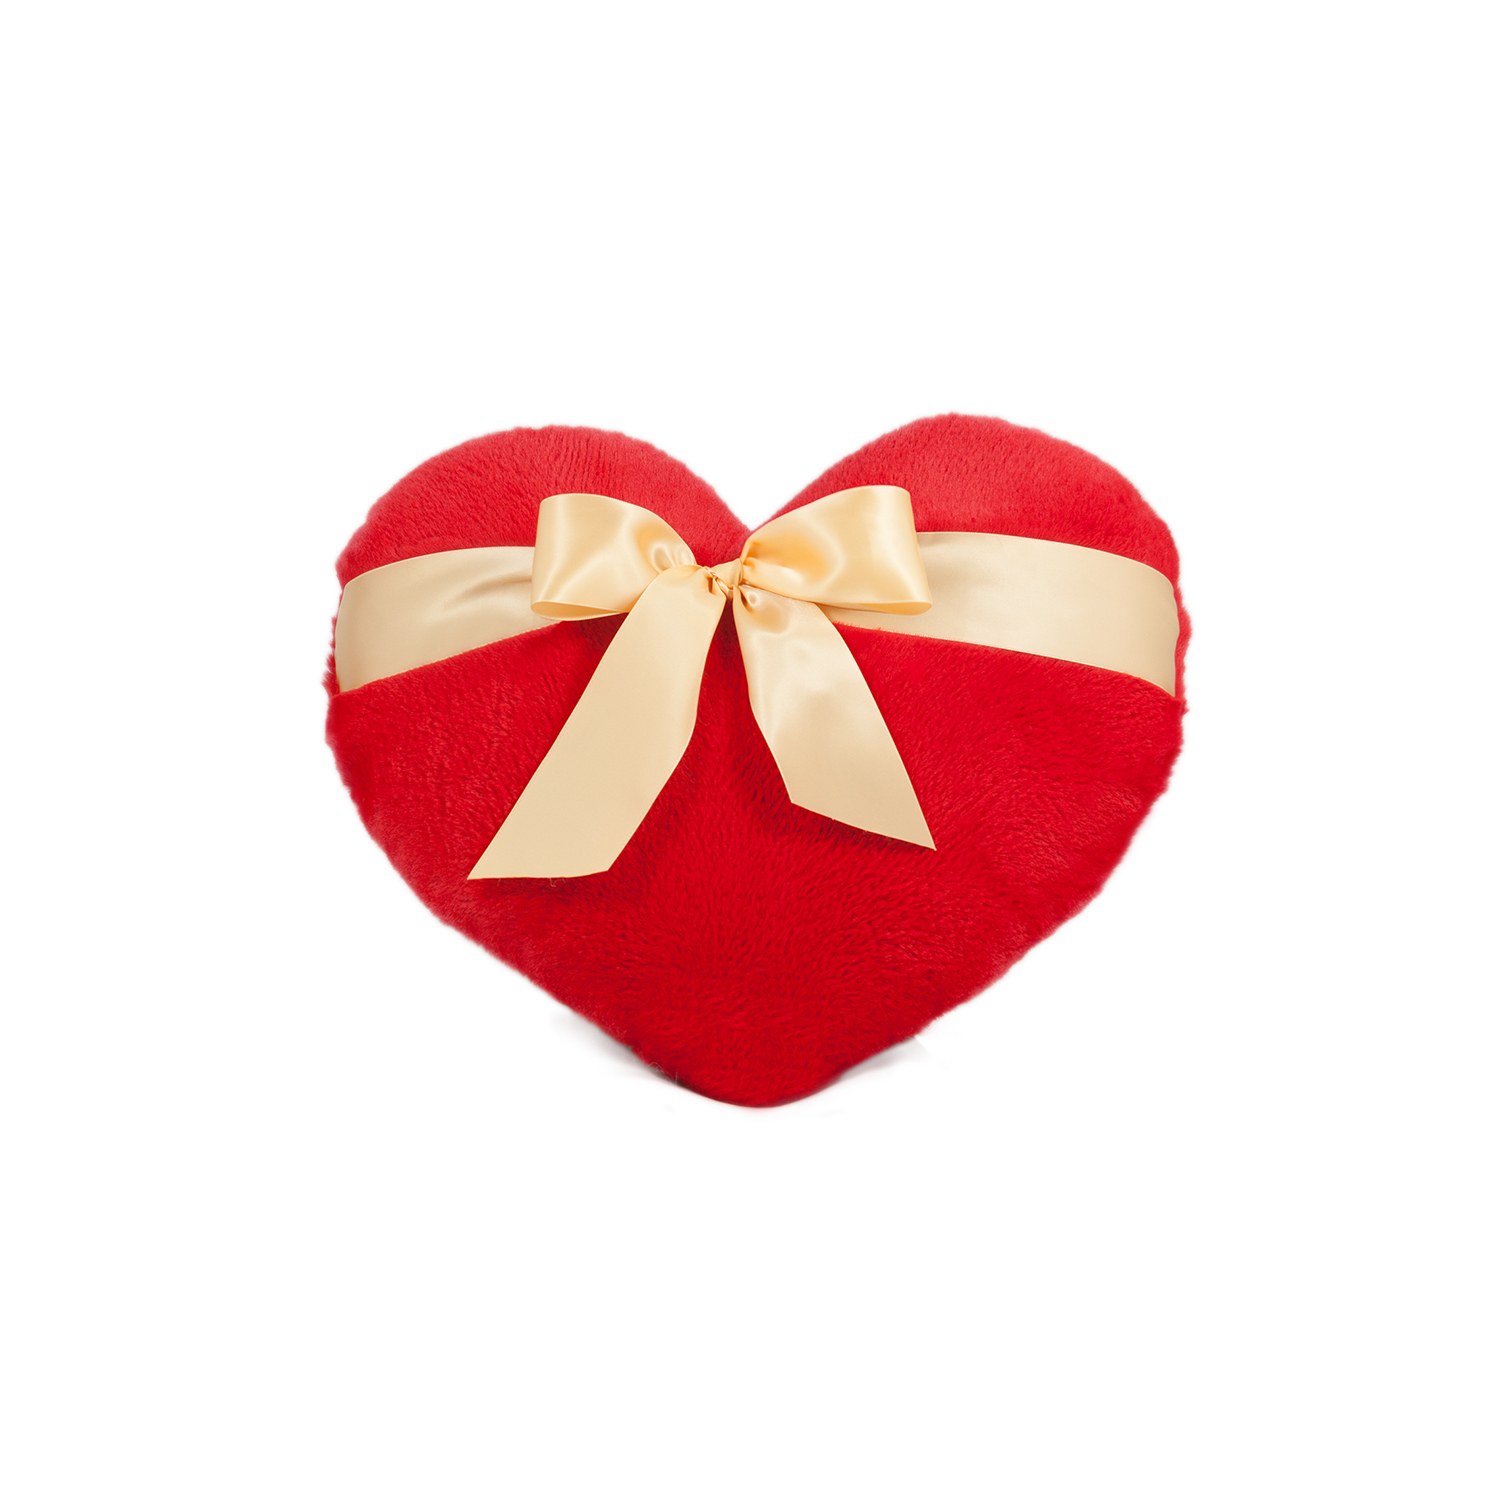 Plush heart with gold ribbon